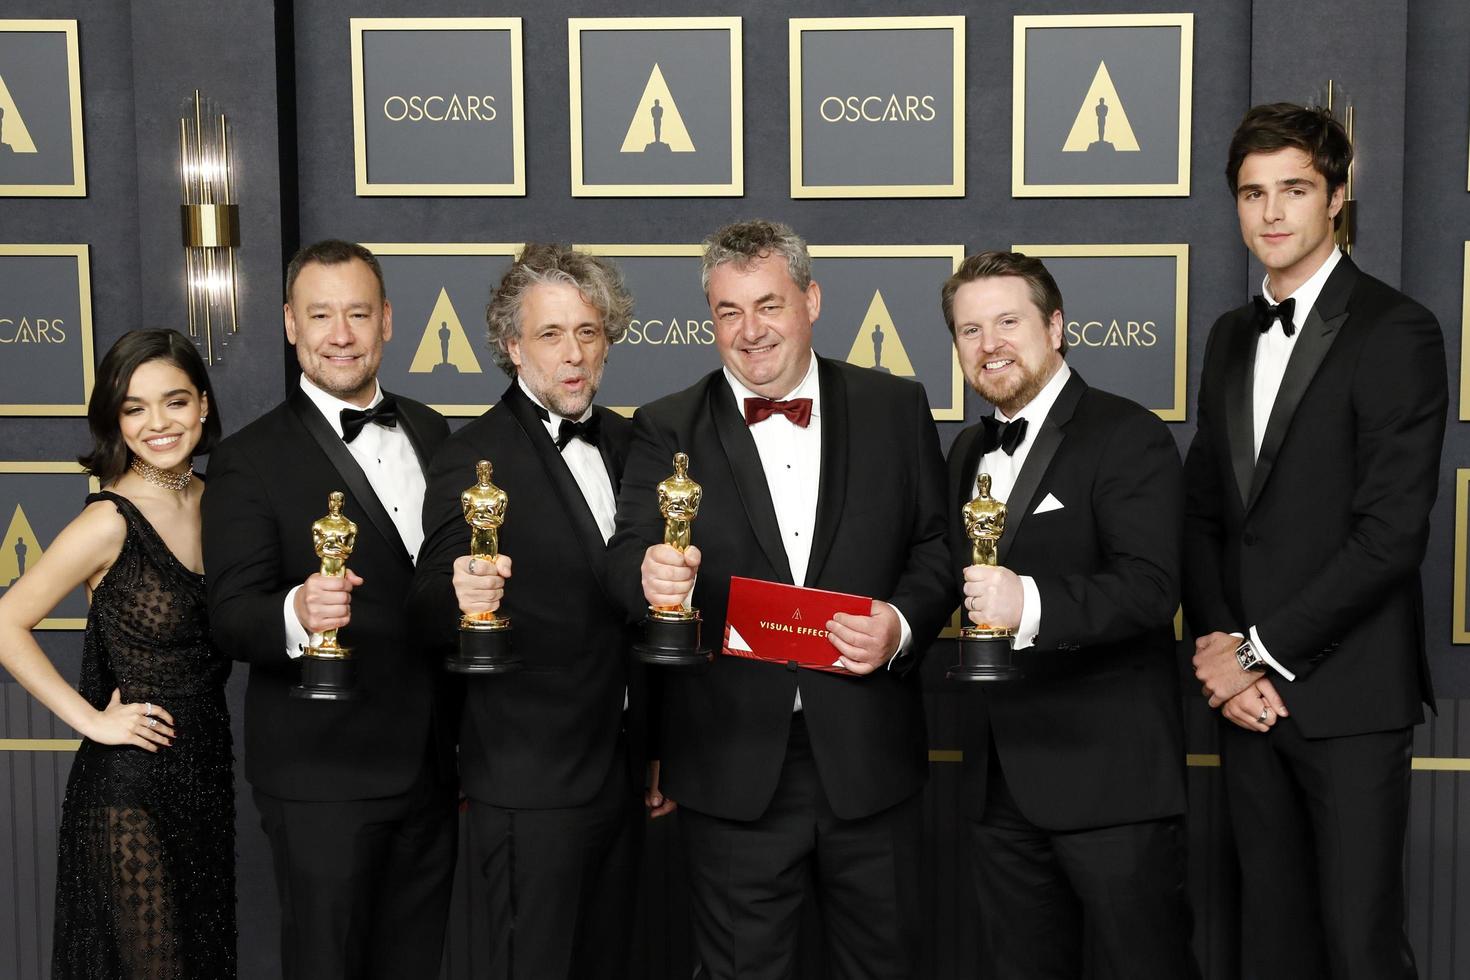 LOS ANGELES - MAR 27 - Rachel Zegler, Brian Connor, Paul Lambert, Gerd Nefzer, Tristan Myles, Jacob Elordi at the 94th Academy Awards at Dolby Theater on March 27, 2022 in Los Angeles, CA photo